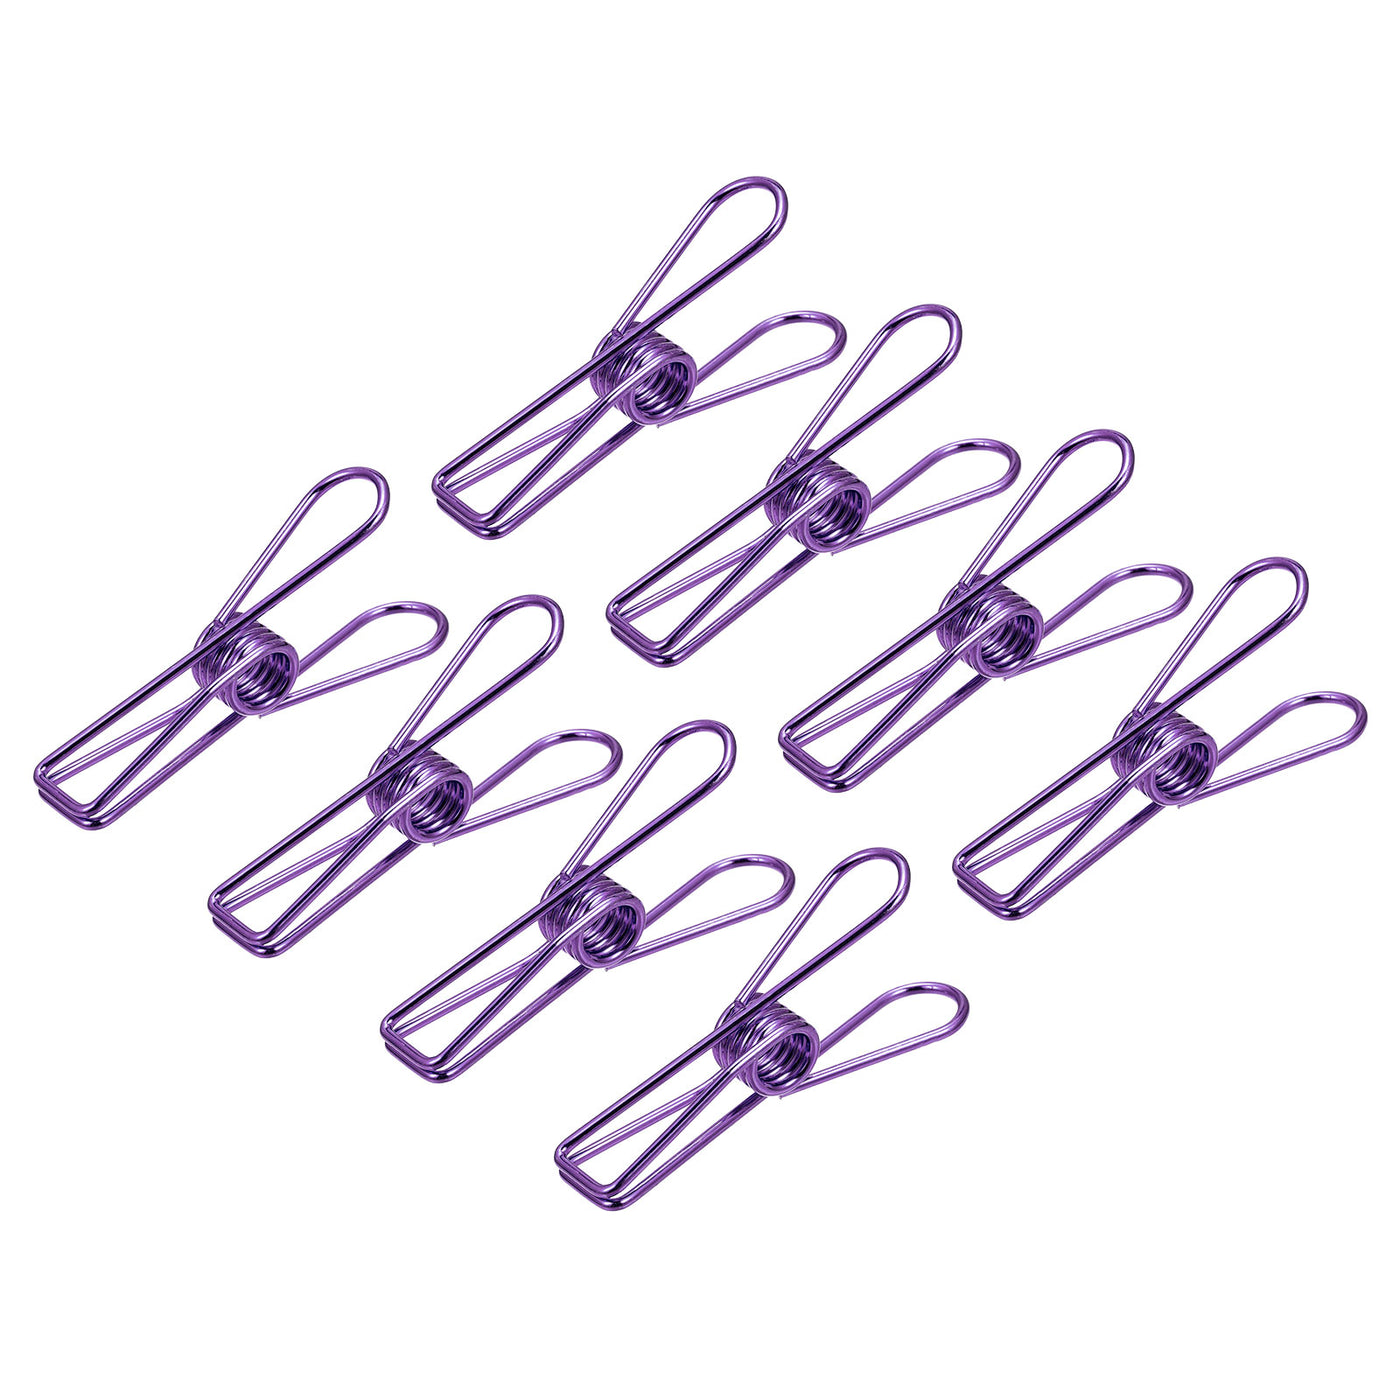 uxcell Uxcell Tablecloth Clips, 55mm Carbon Steel Clamps for Fix Table Cloth, Purple 8 Pcs